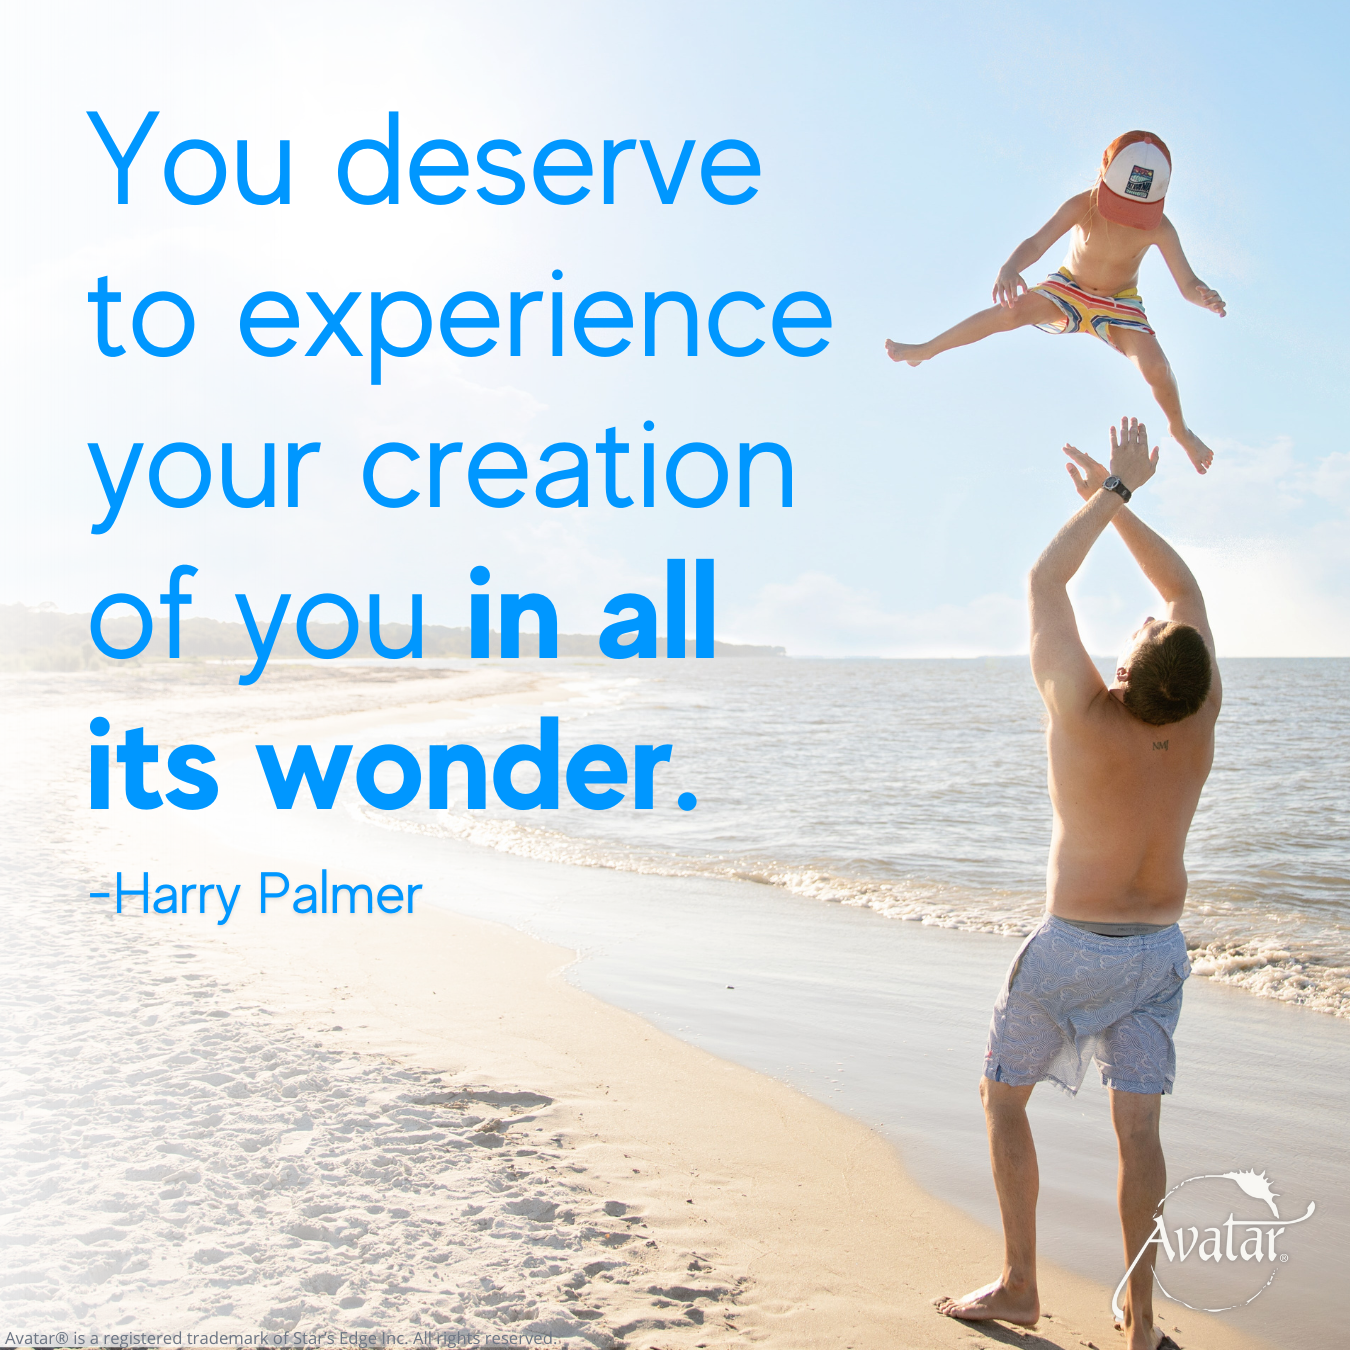 You deserve to experience your creation of you in all it's wonder